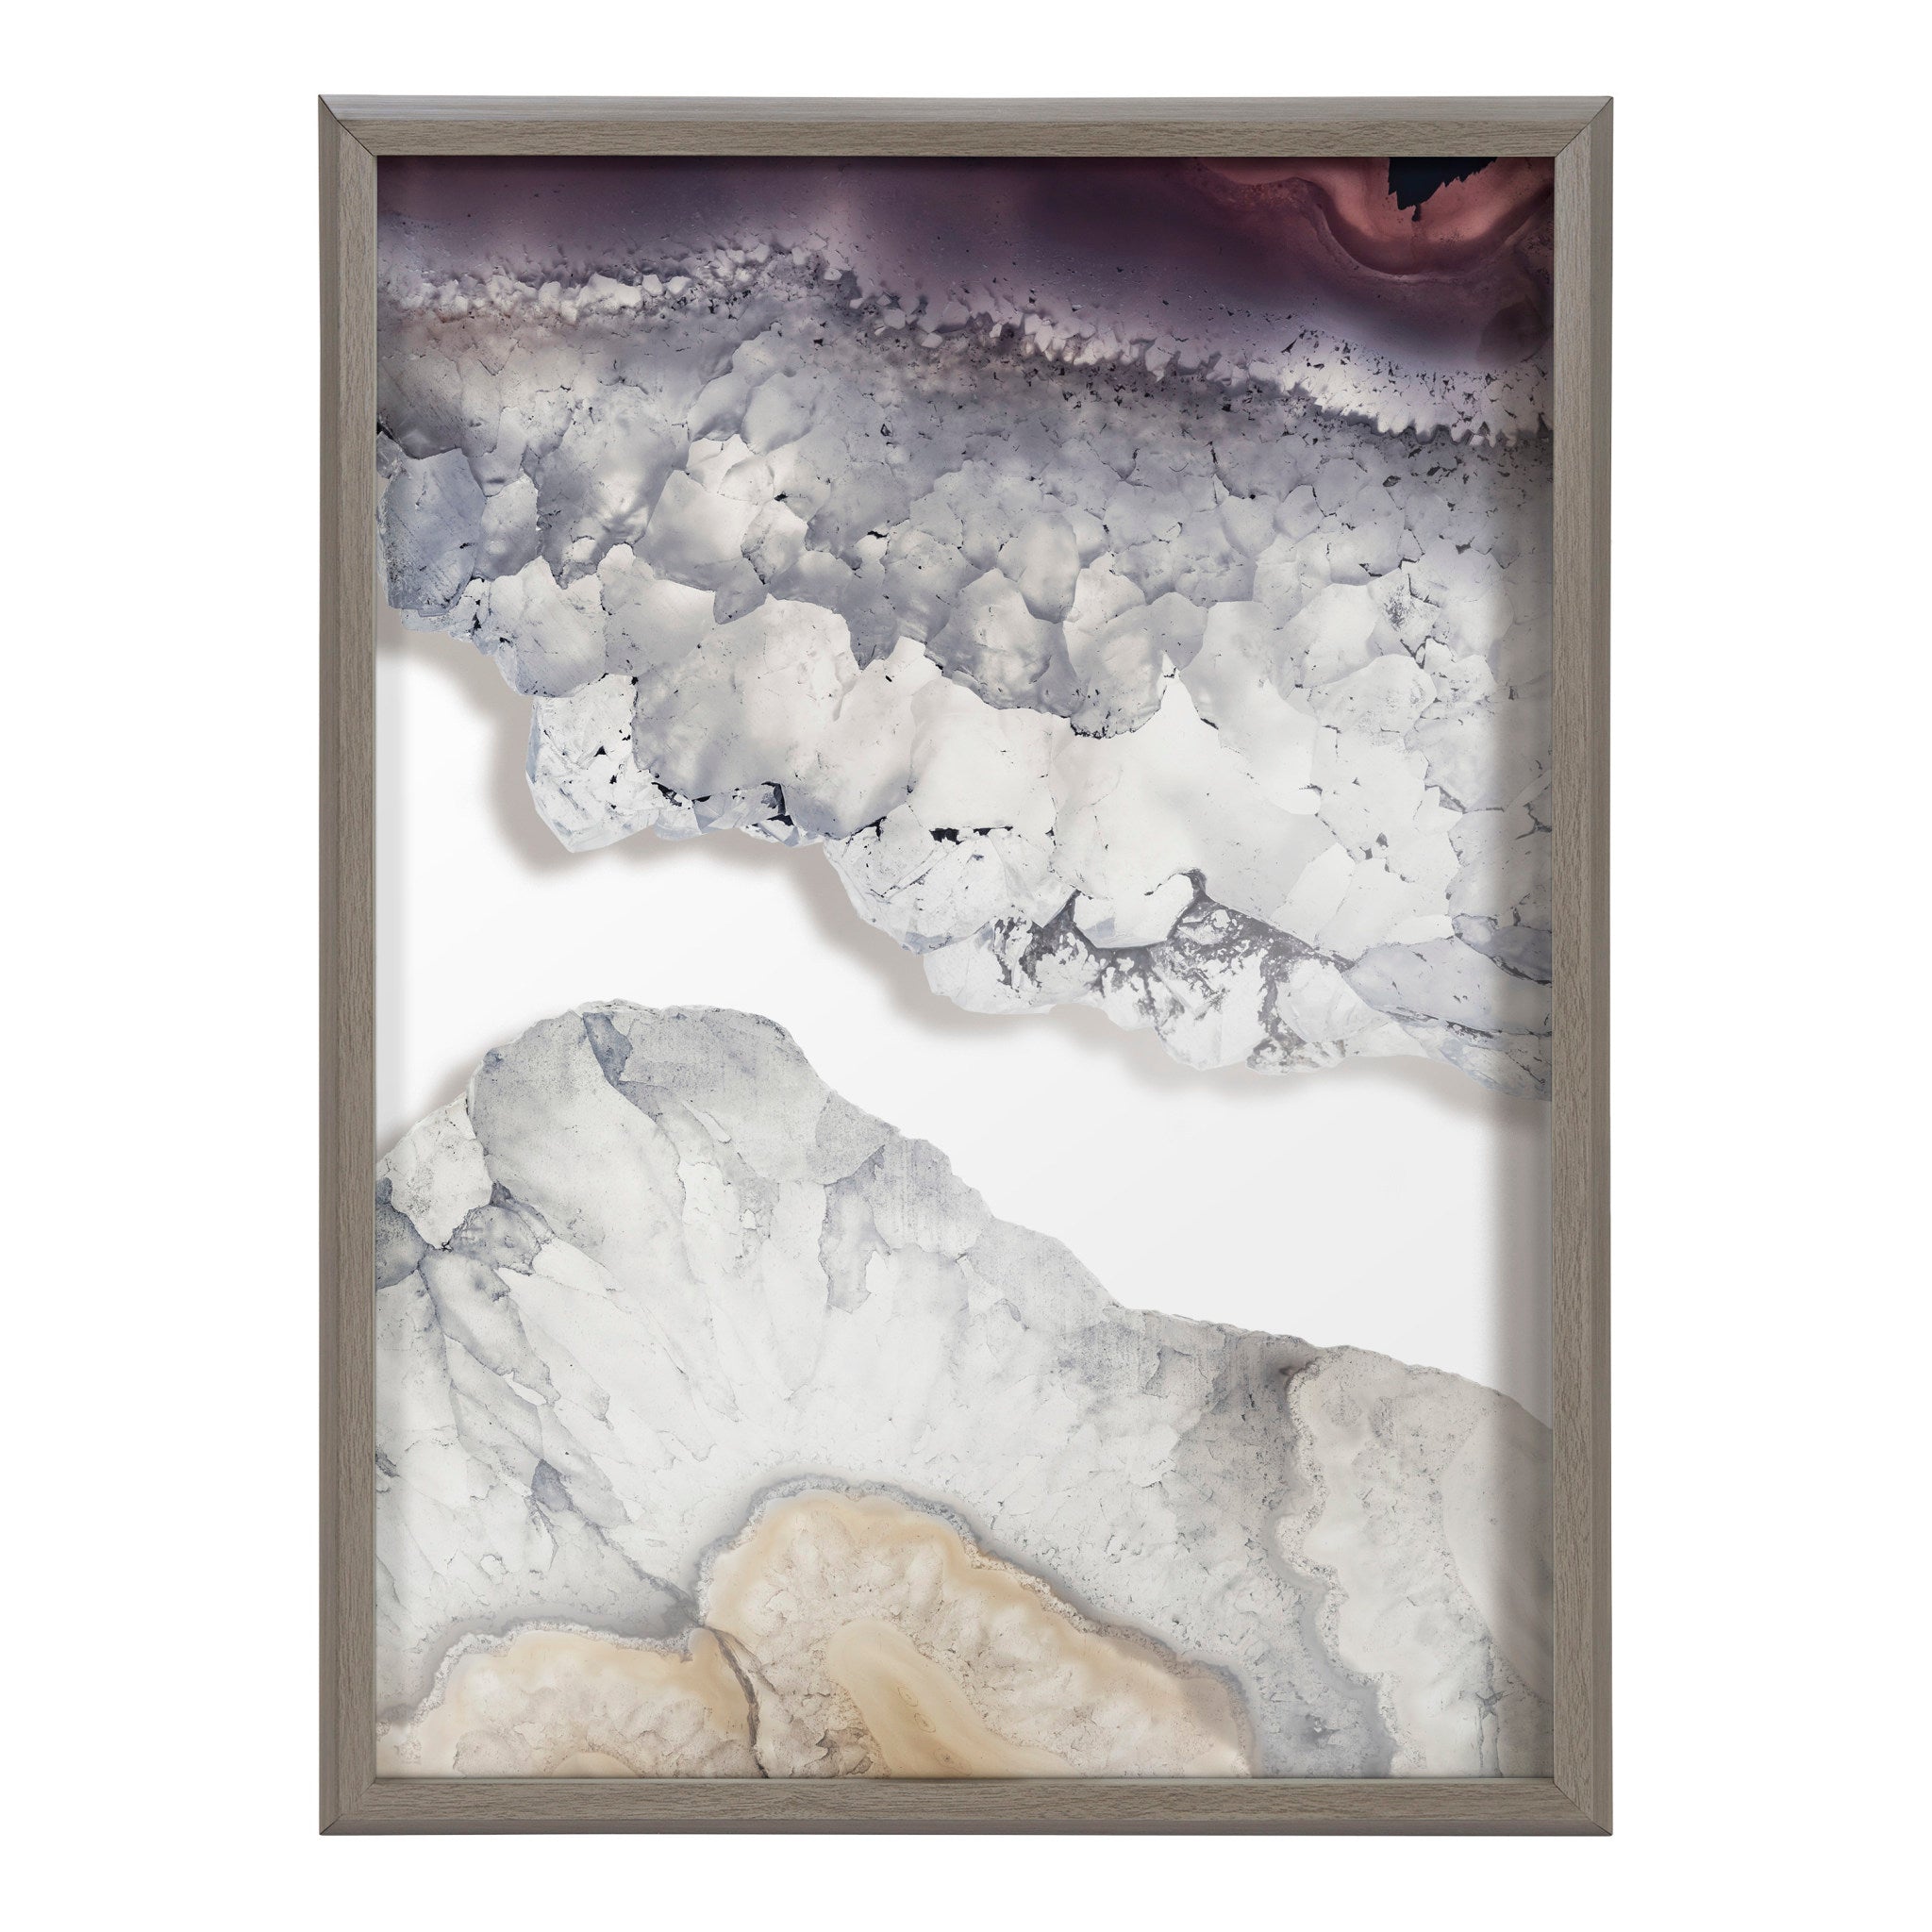 Blake Elements of Old Framed Printed Glass by Emiko and Mark Franzen of F2Images